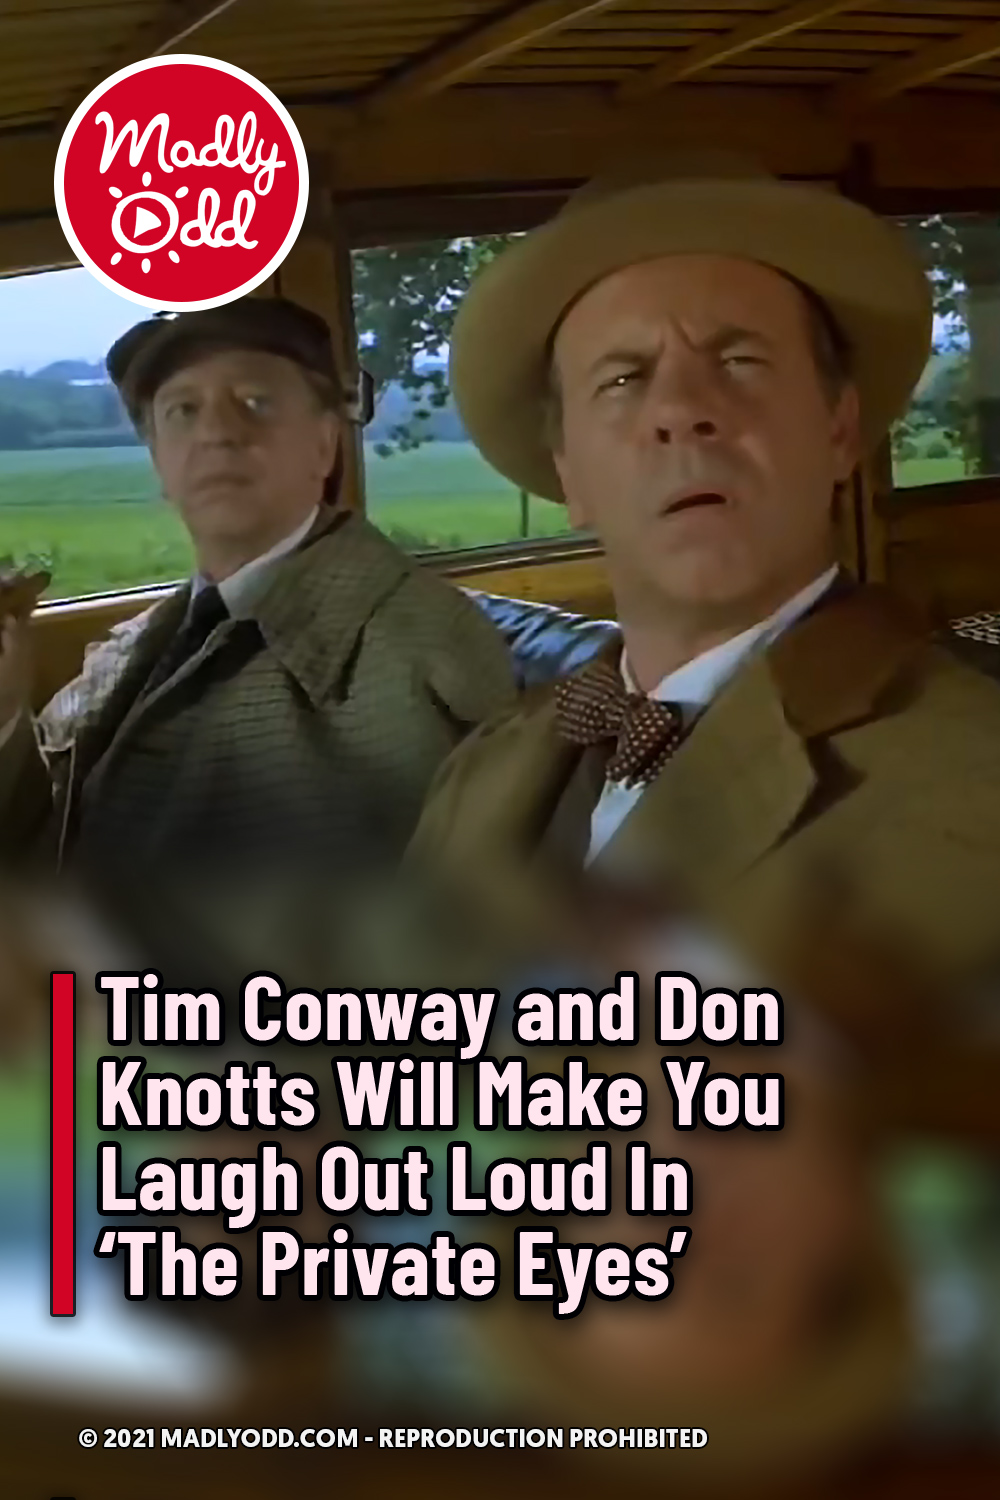 Tim Conway and Don Knotts Will Make You Laugh Out Loud In \'The Private Eyes\'